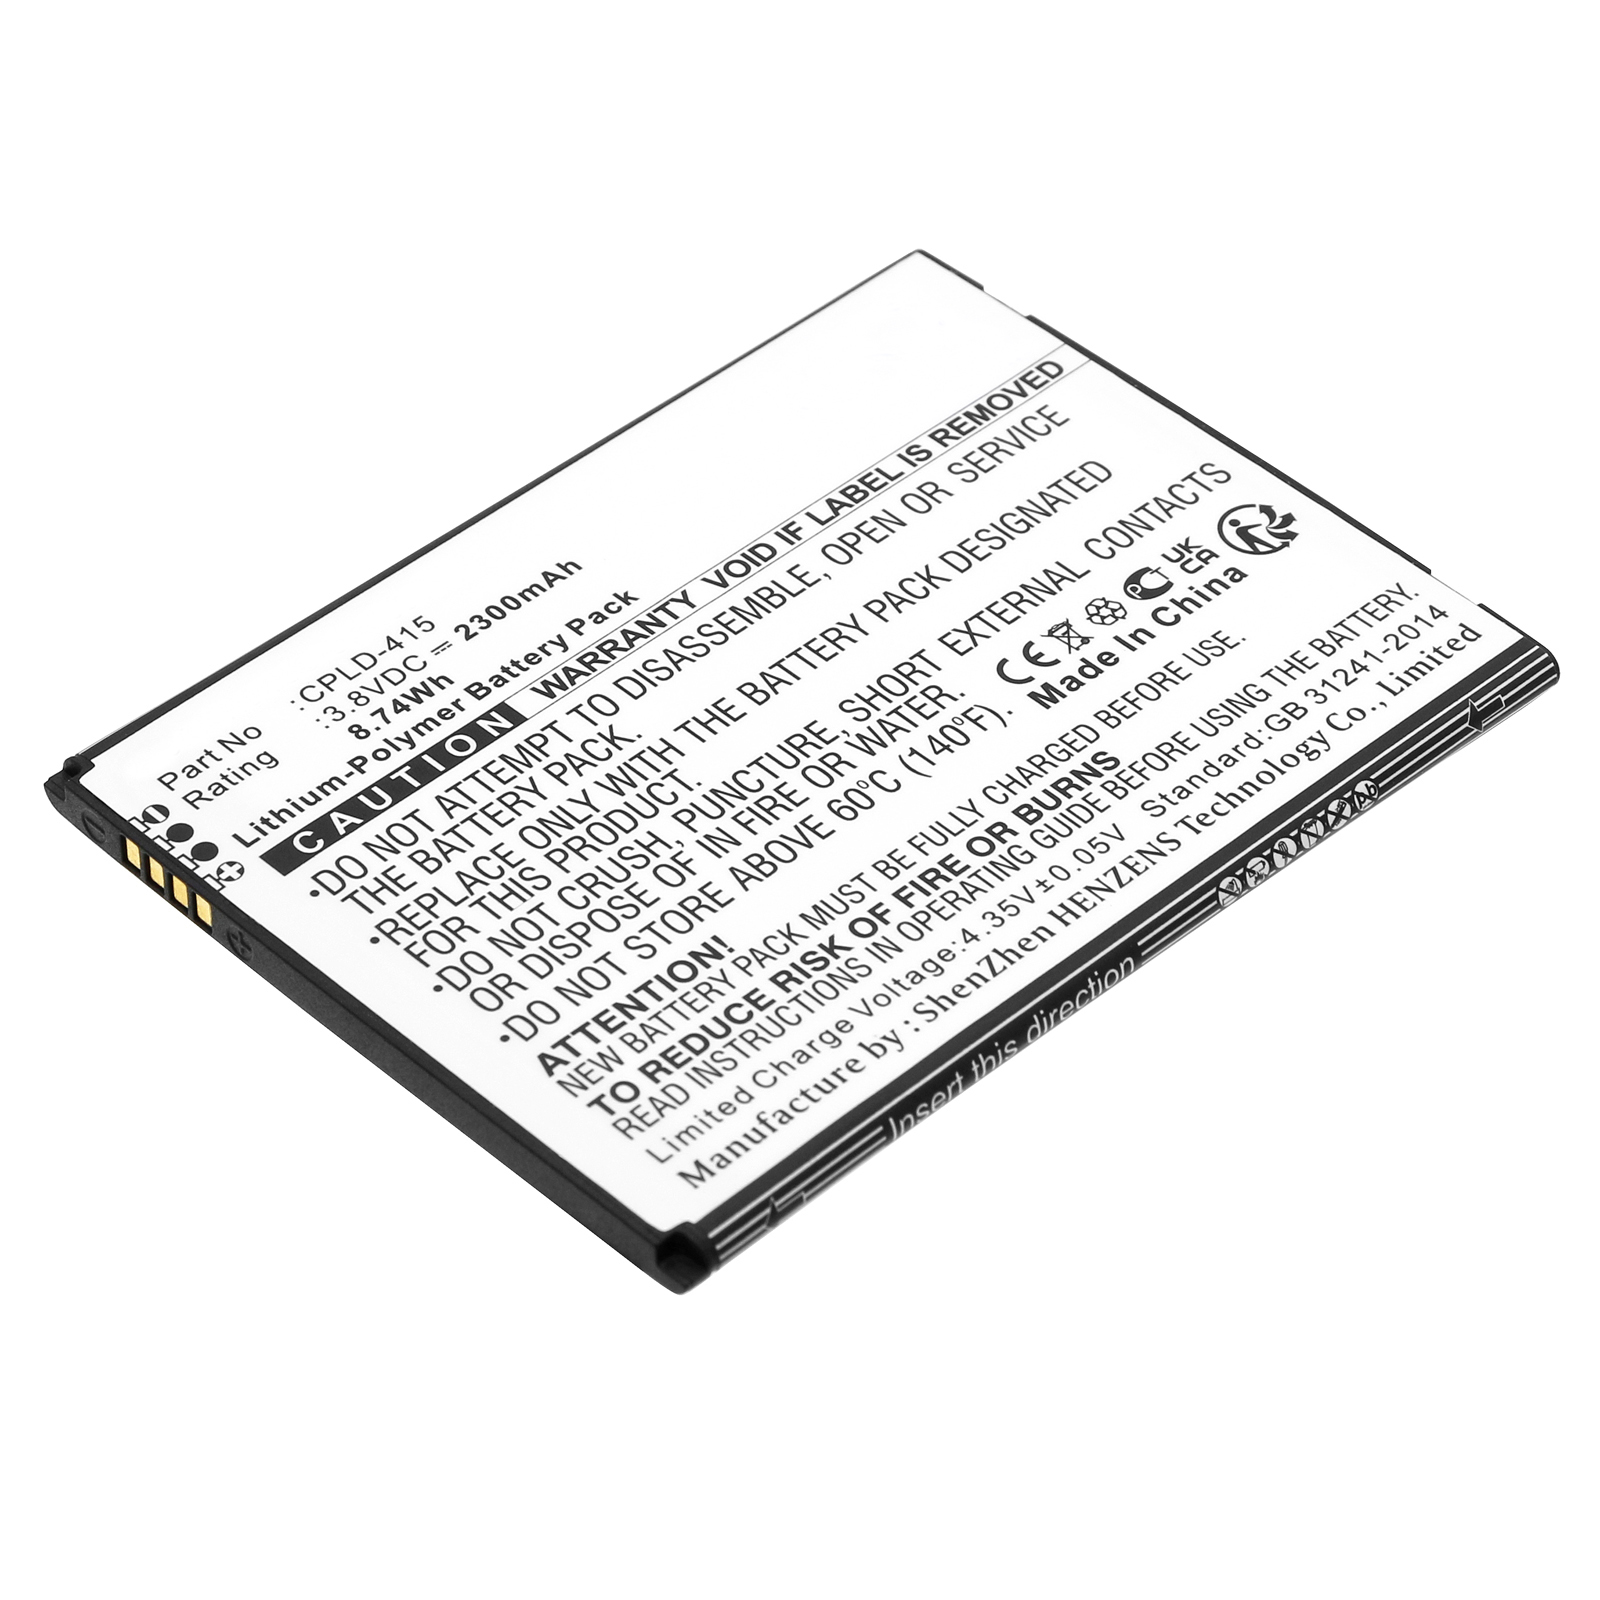 Synergy Digital Cell Phone Battery, Compatible with Coolpad CPLD-415 Cell Phone Battery (Li-Pol, 3.8V, 2300mAh)